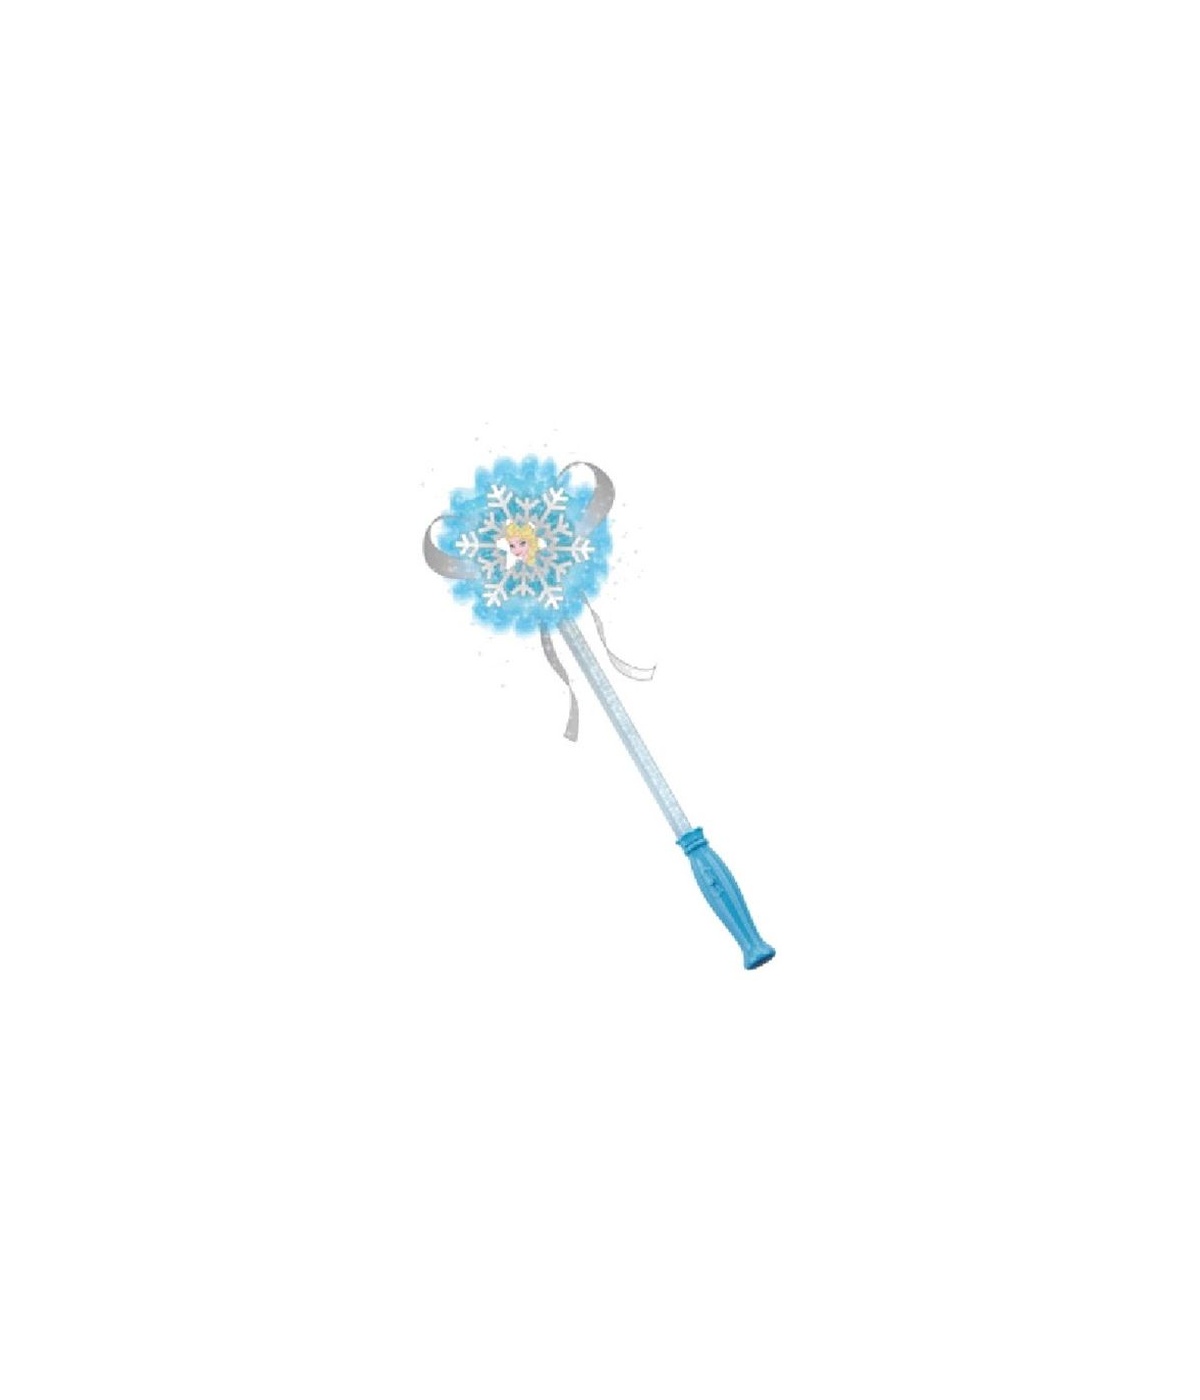 Disney Frozen Elsa Wand Girls Costume Light Up And Sound Accessory Toy